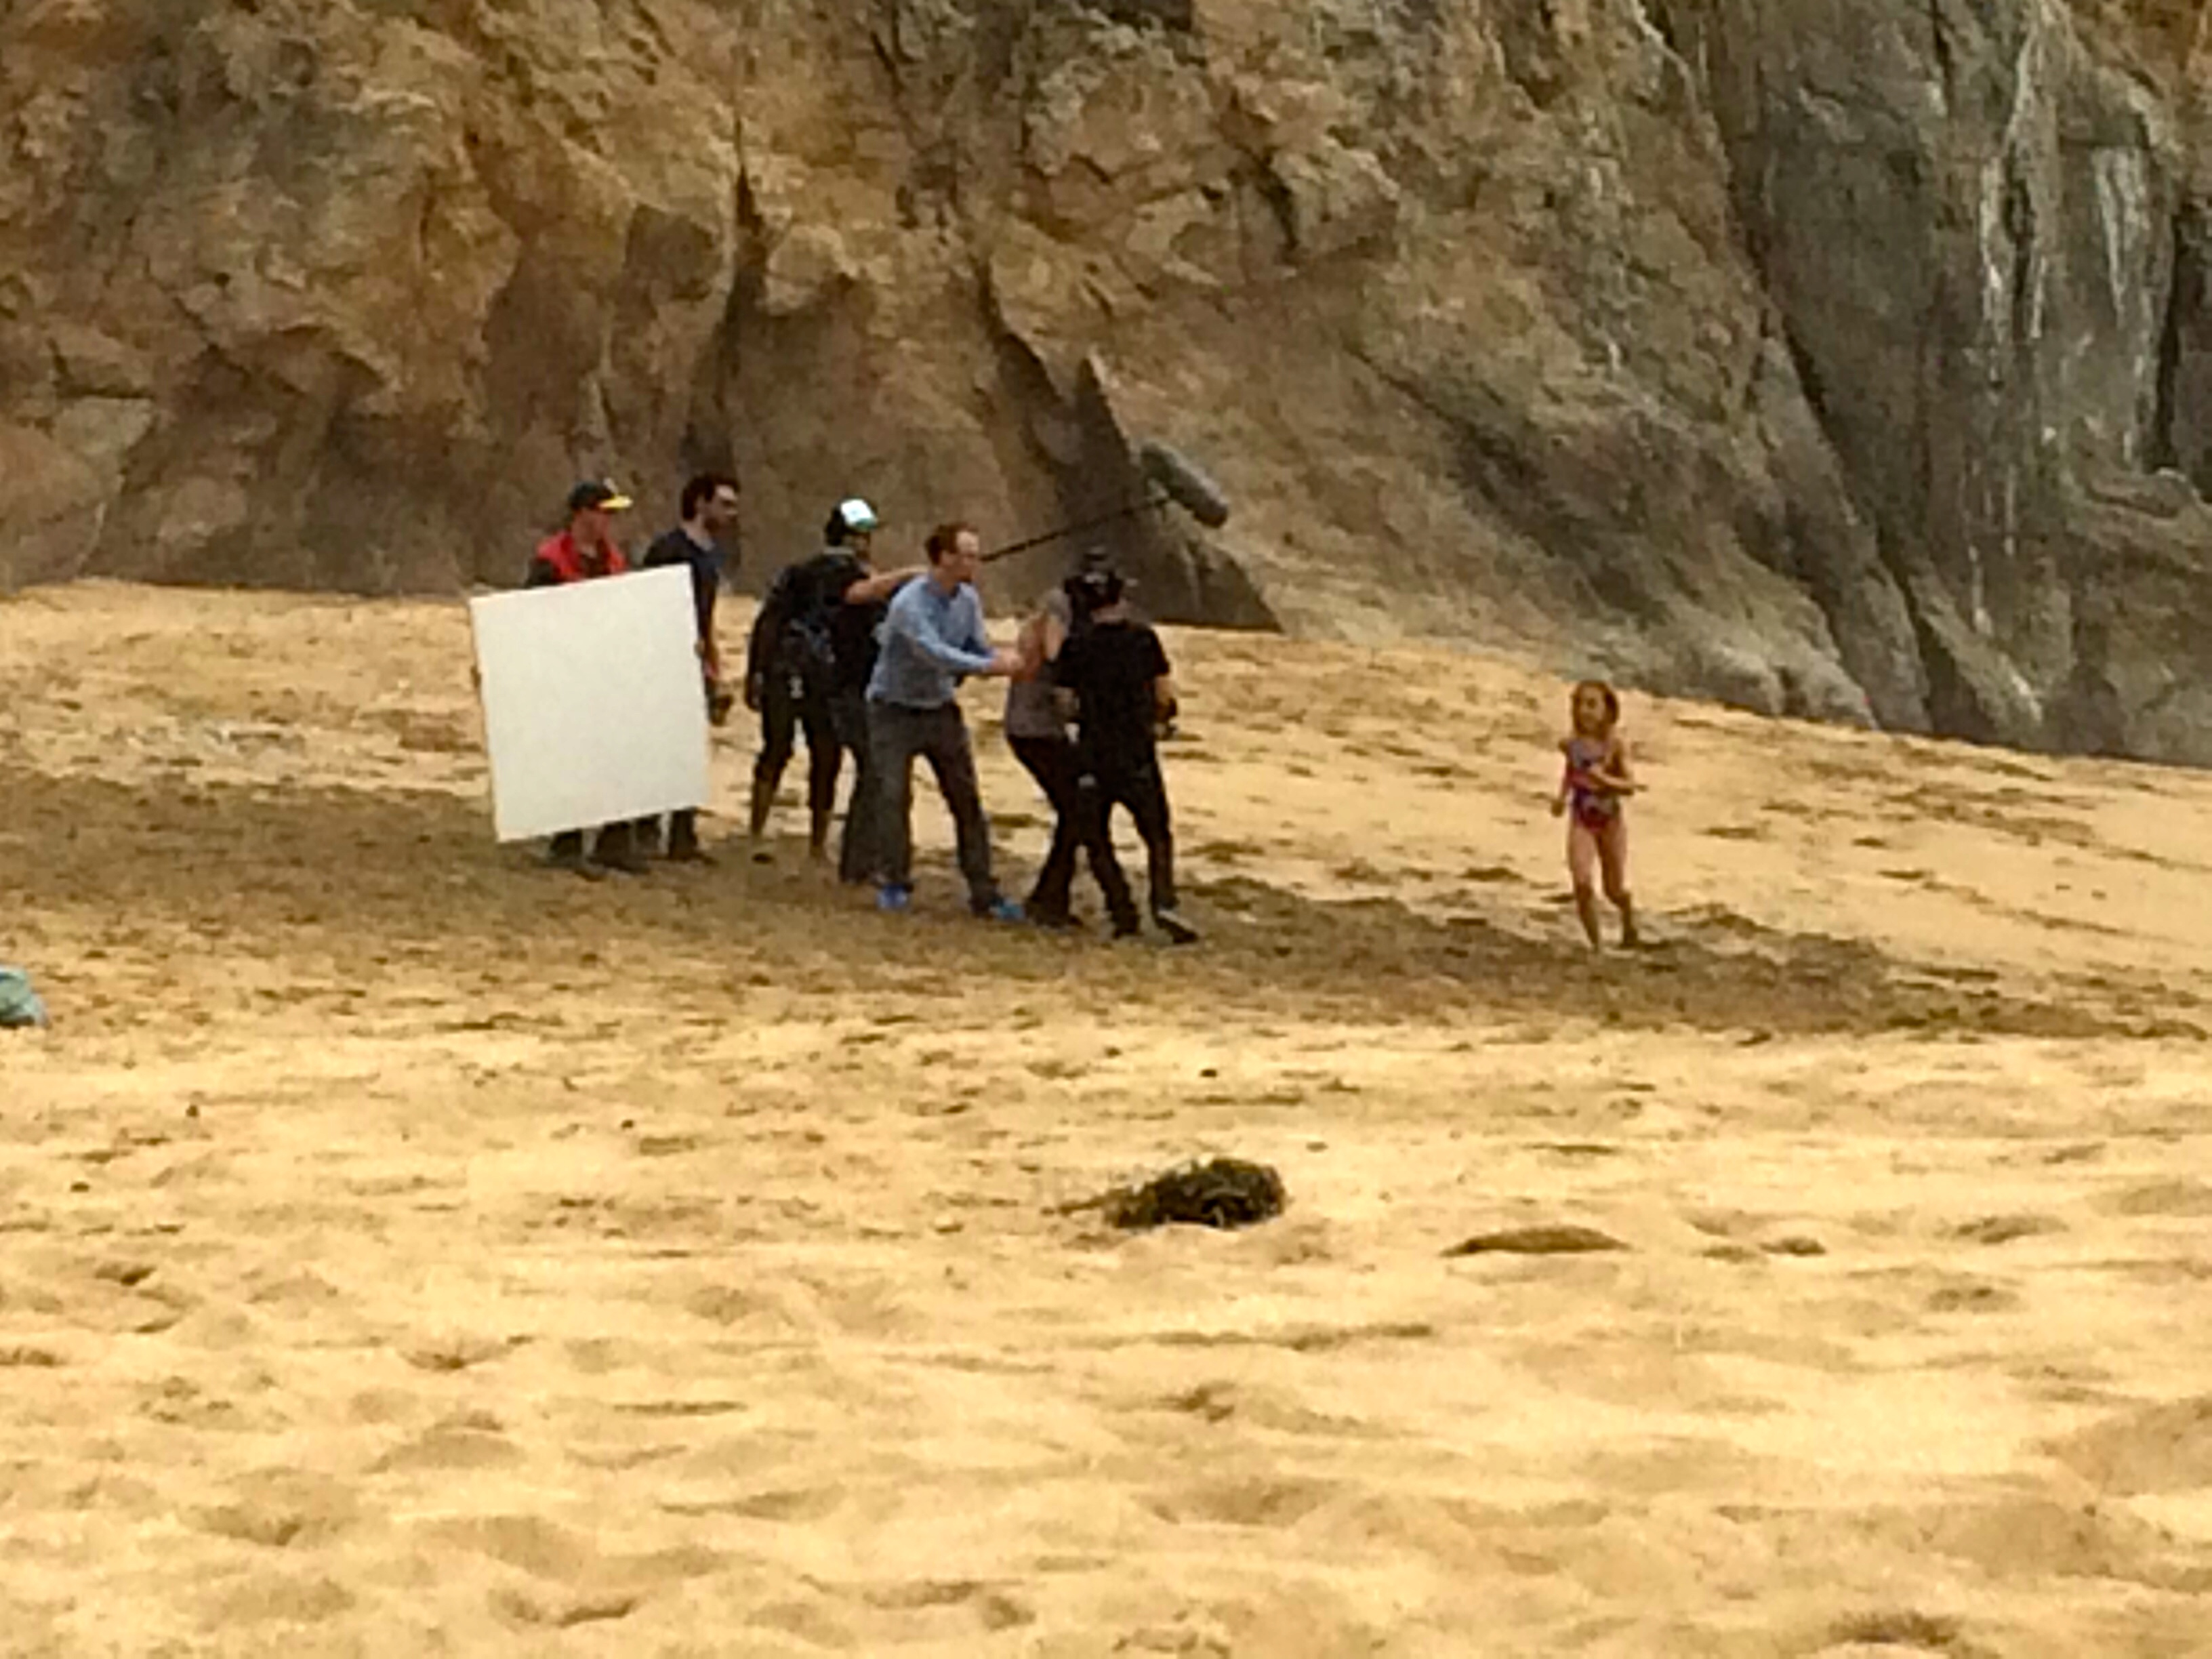 On set for The Shallows.